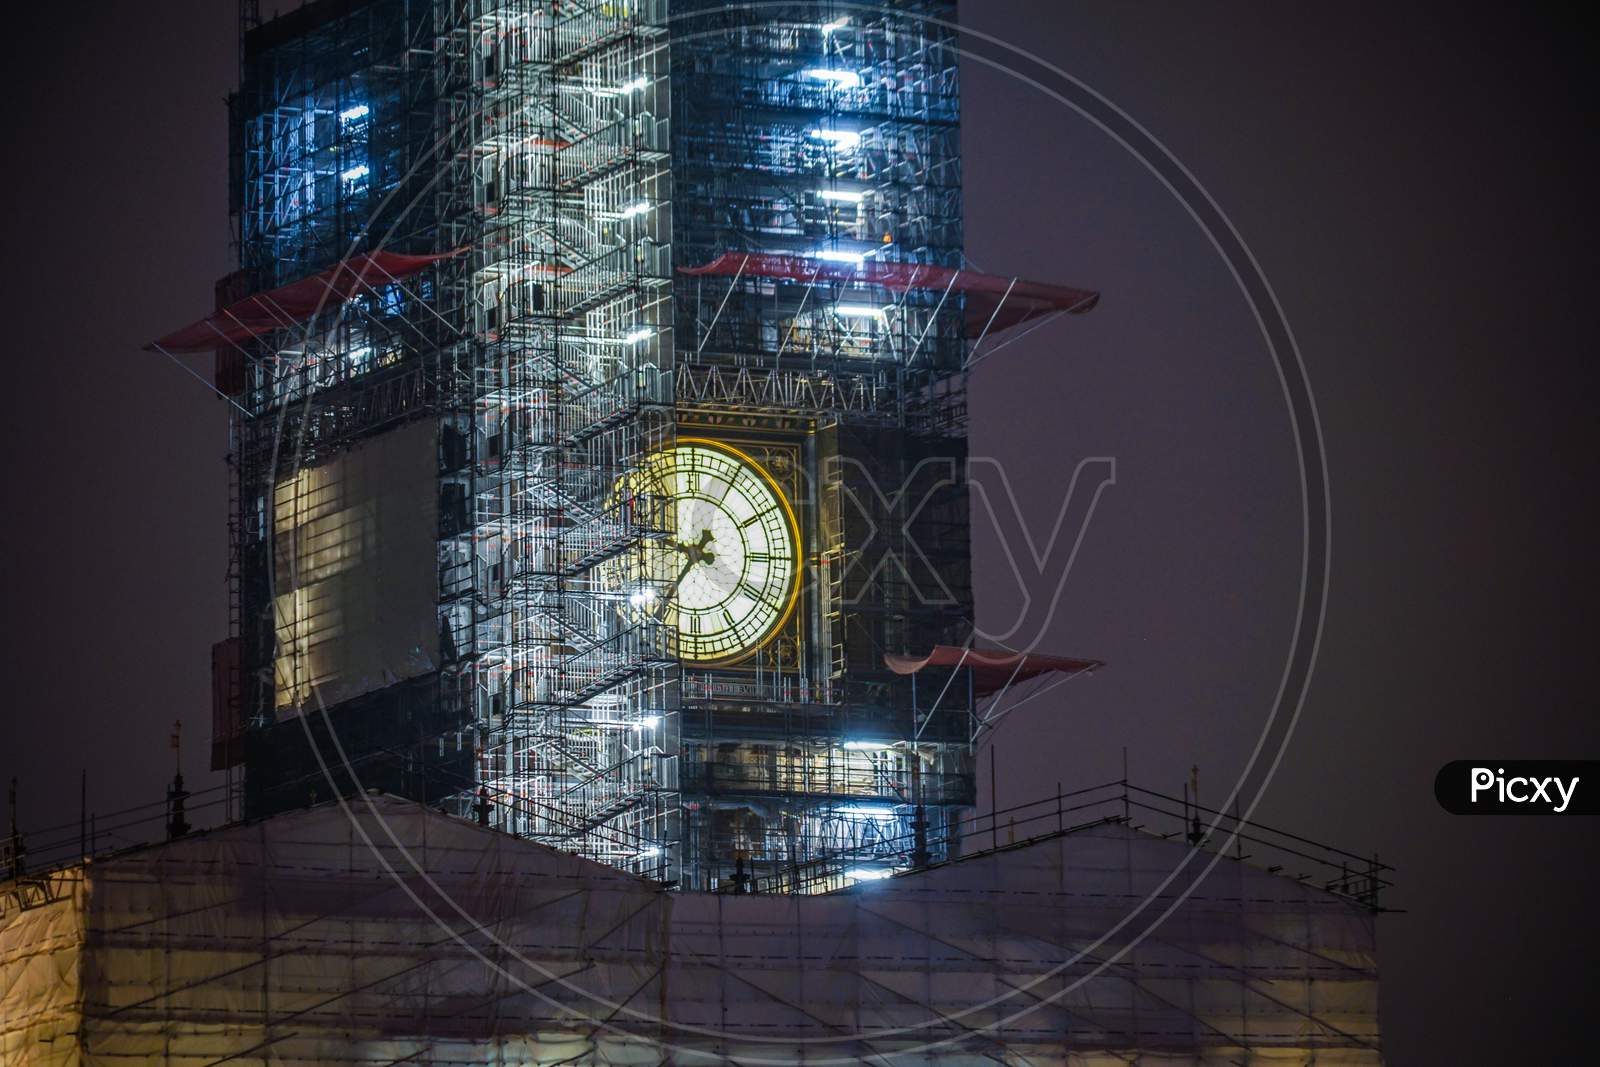 Night View Of Big Ben In The Renovation (London)